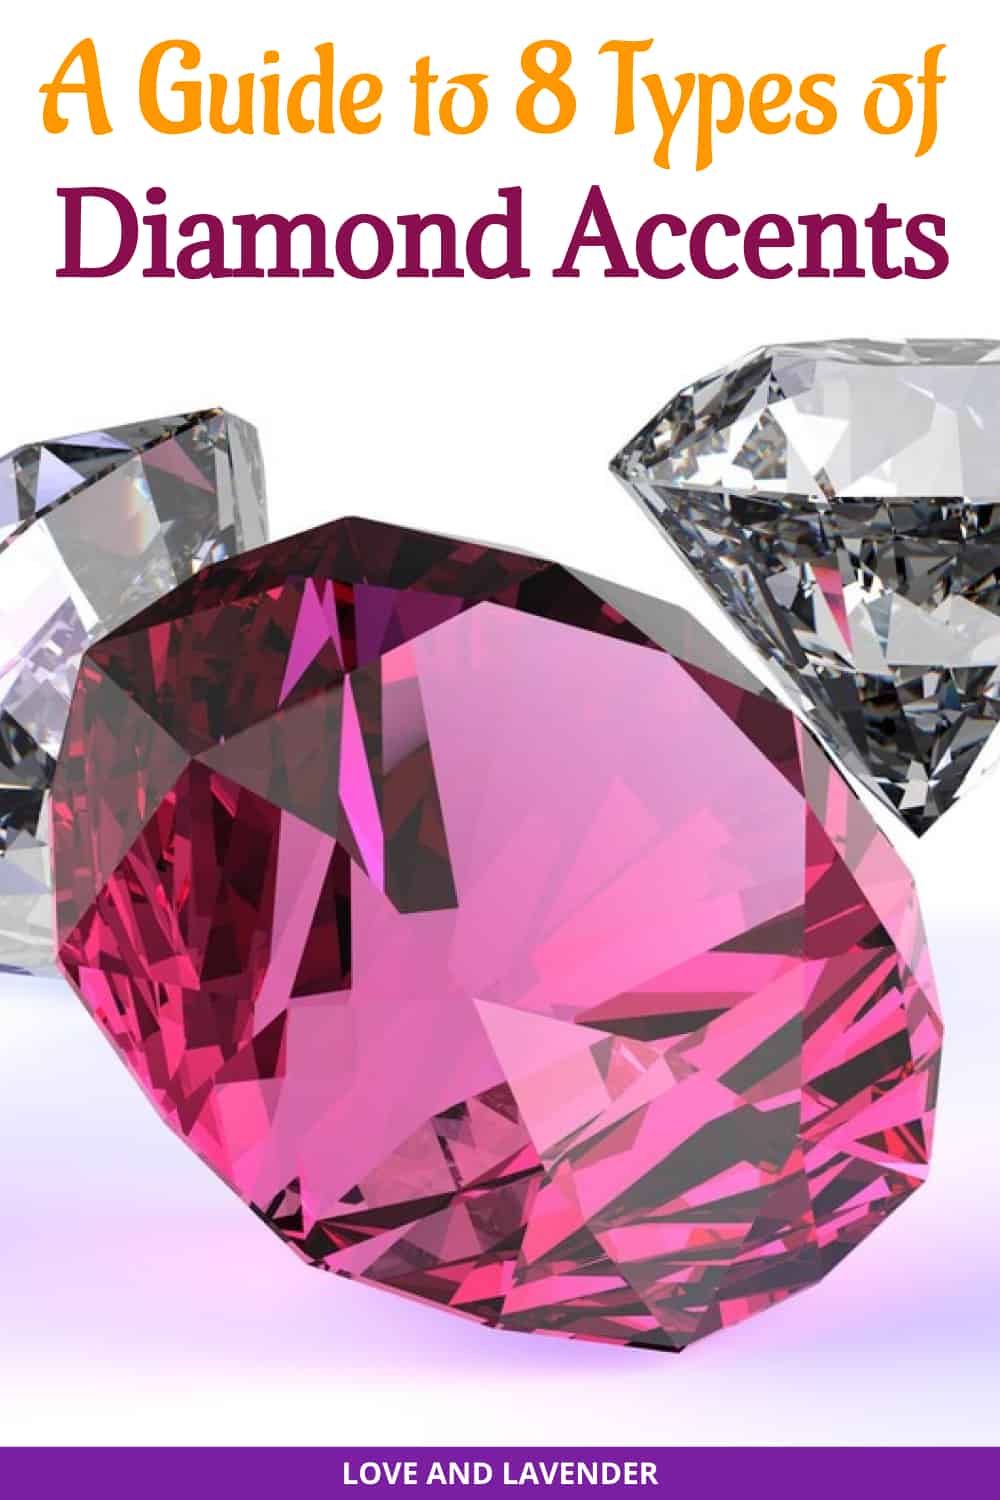 Quick Guide to 8 Types of Diamond Accents - Pinterest pin